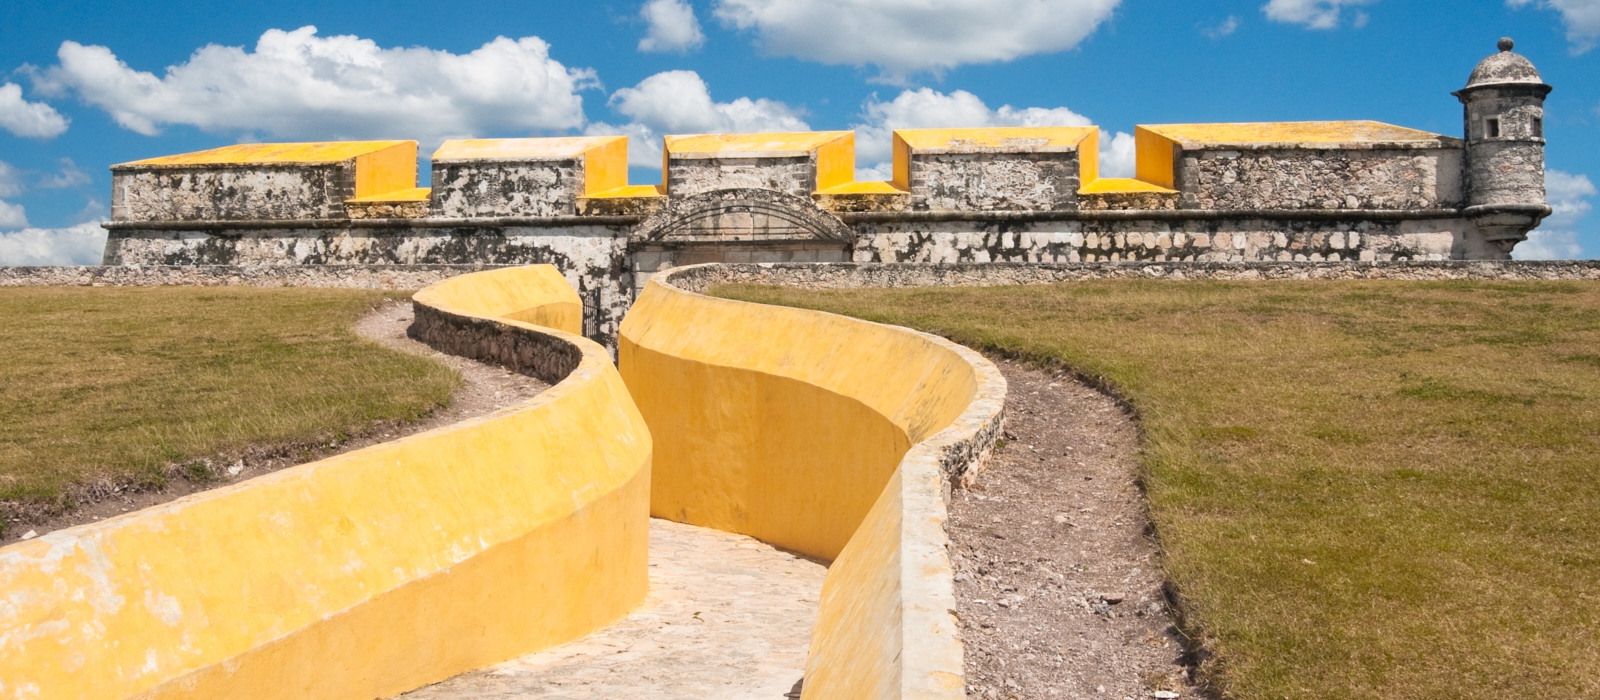 Discovering  Campeche